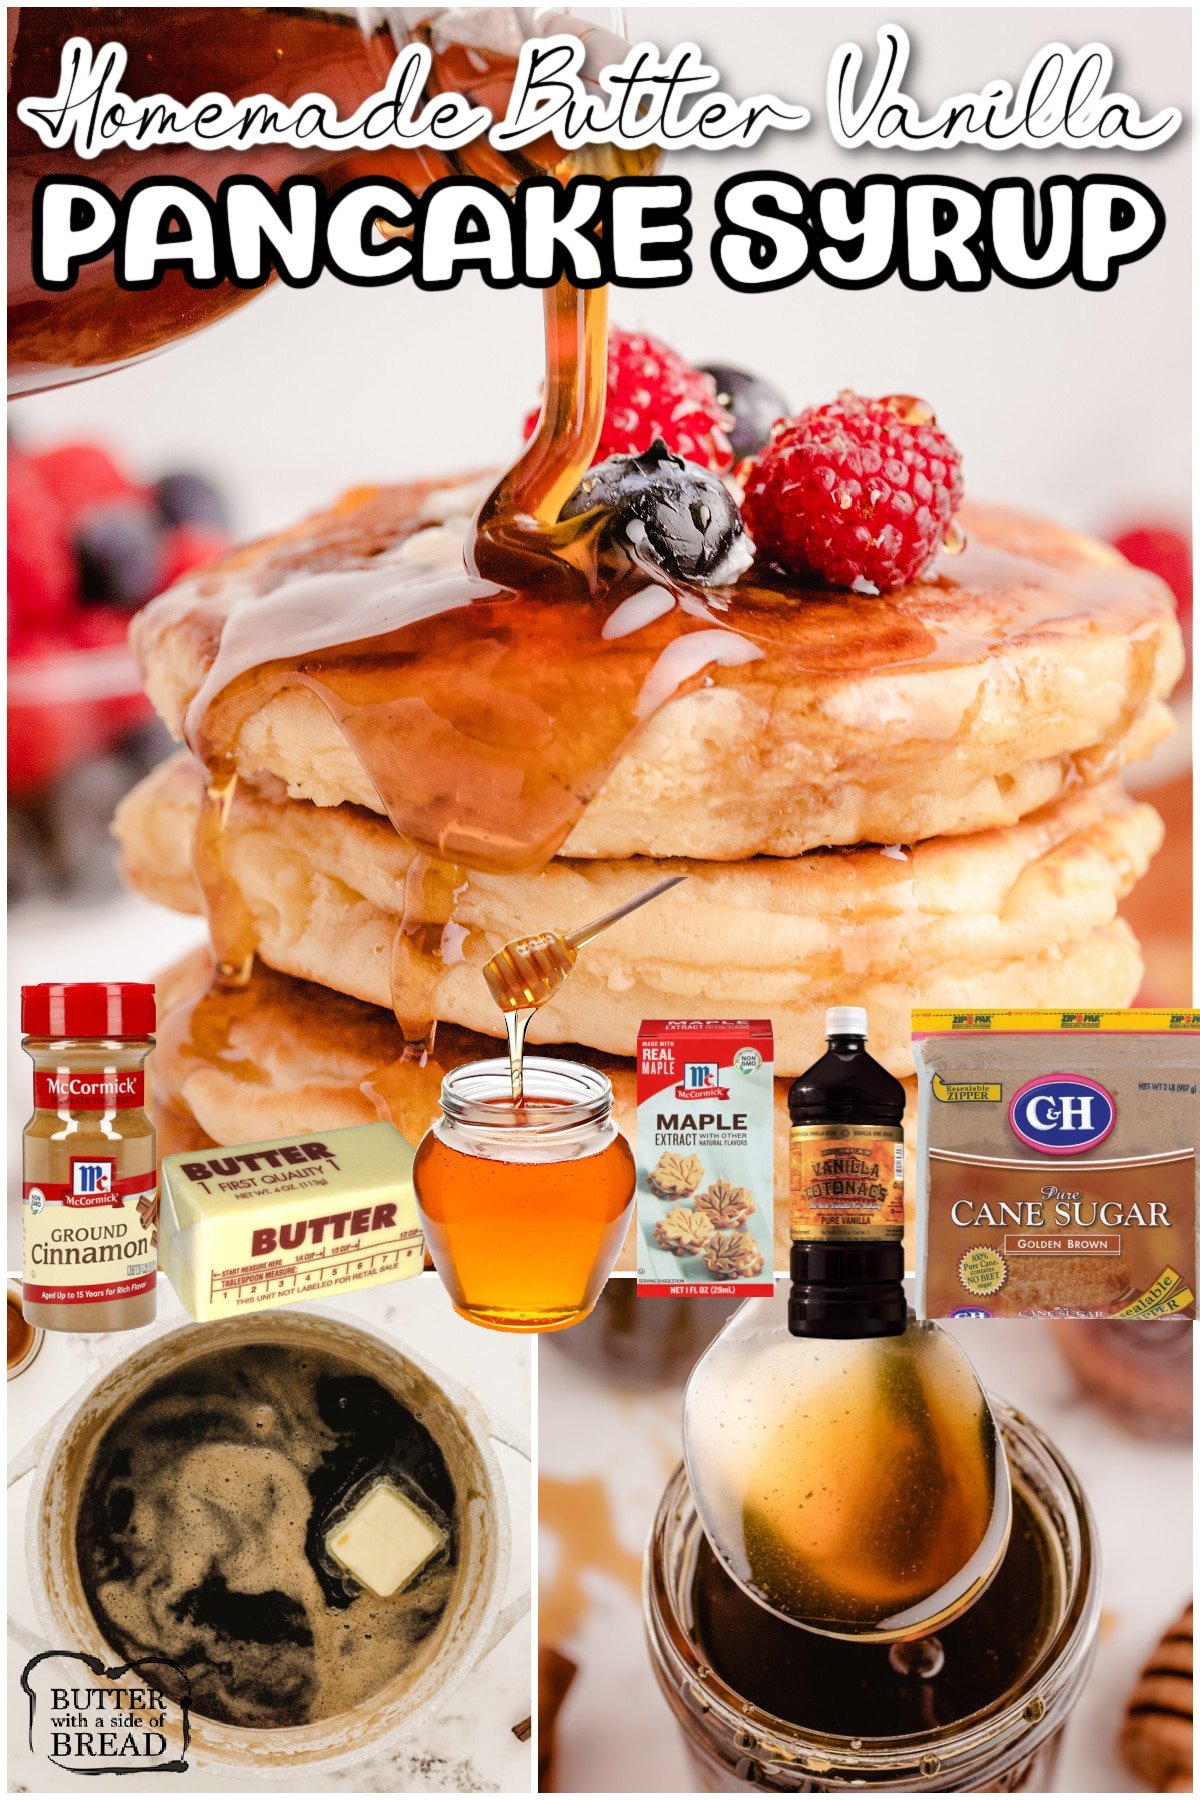 Our Vanilla Butter Pancake Syrup Recipe is SO much BETTER than store-bought! Fantastic warm buttery maple pancake syrup make with brown sugar, honey, butter and extracts. Simple recipe everyone adores!